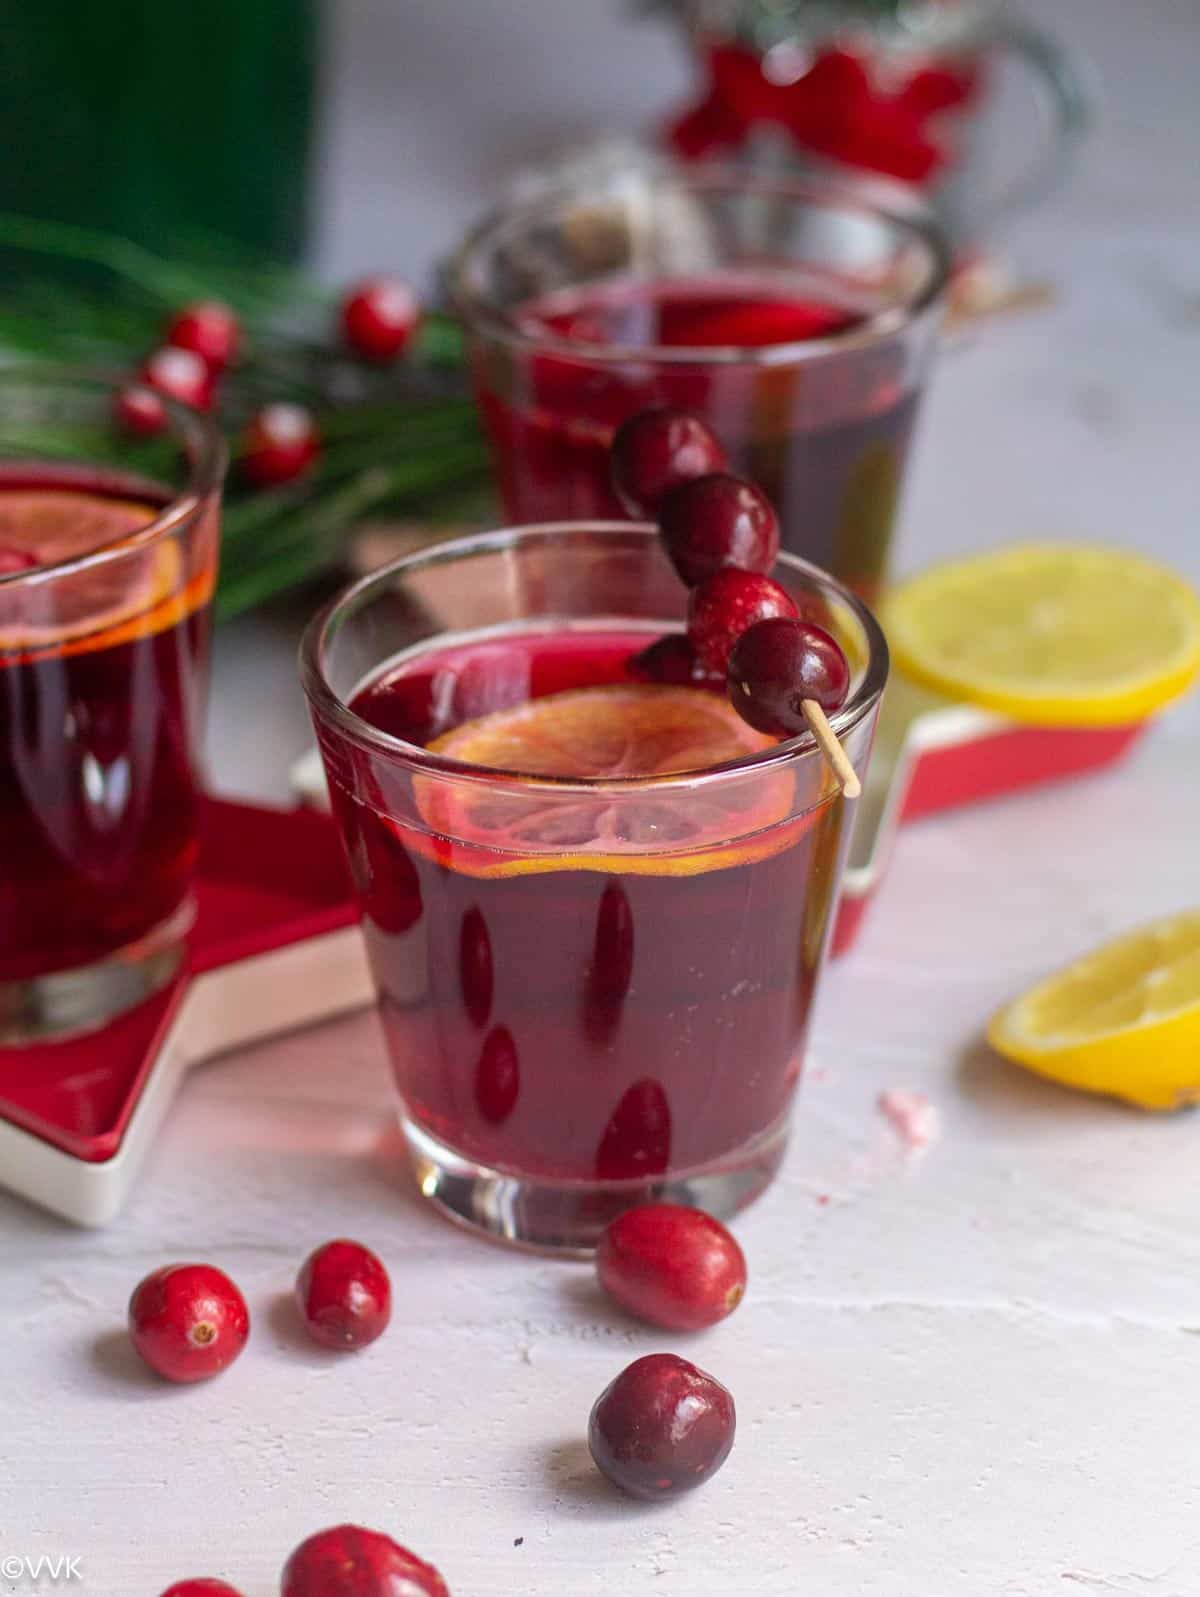 festive special cranberry ginger ale cocktail served with lemon wedges